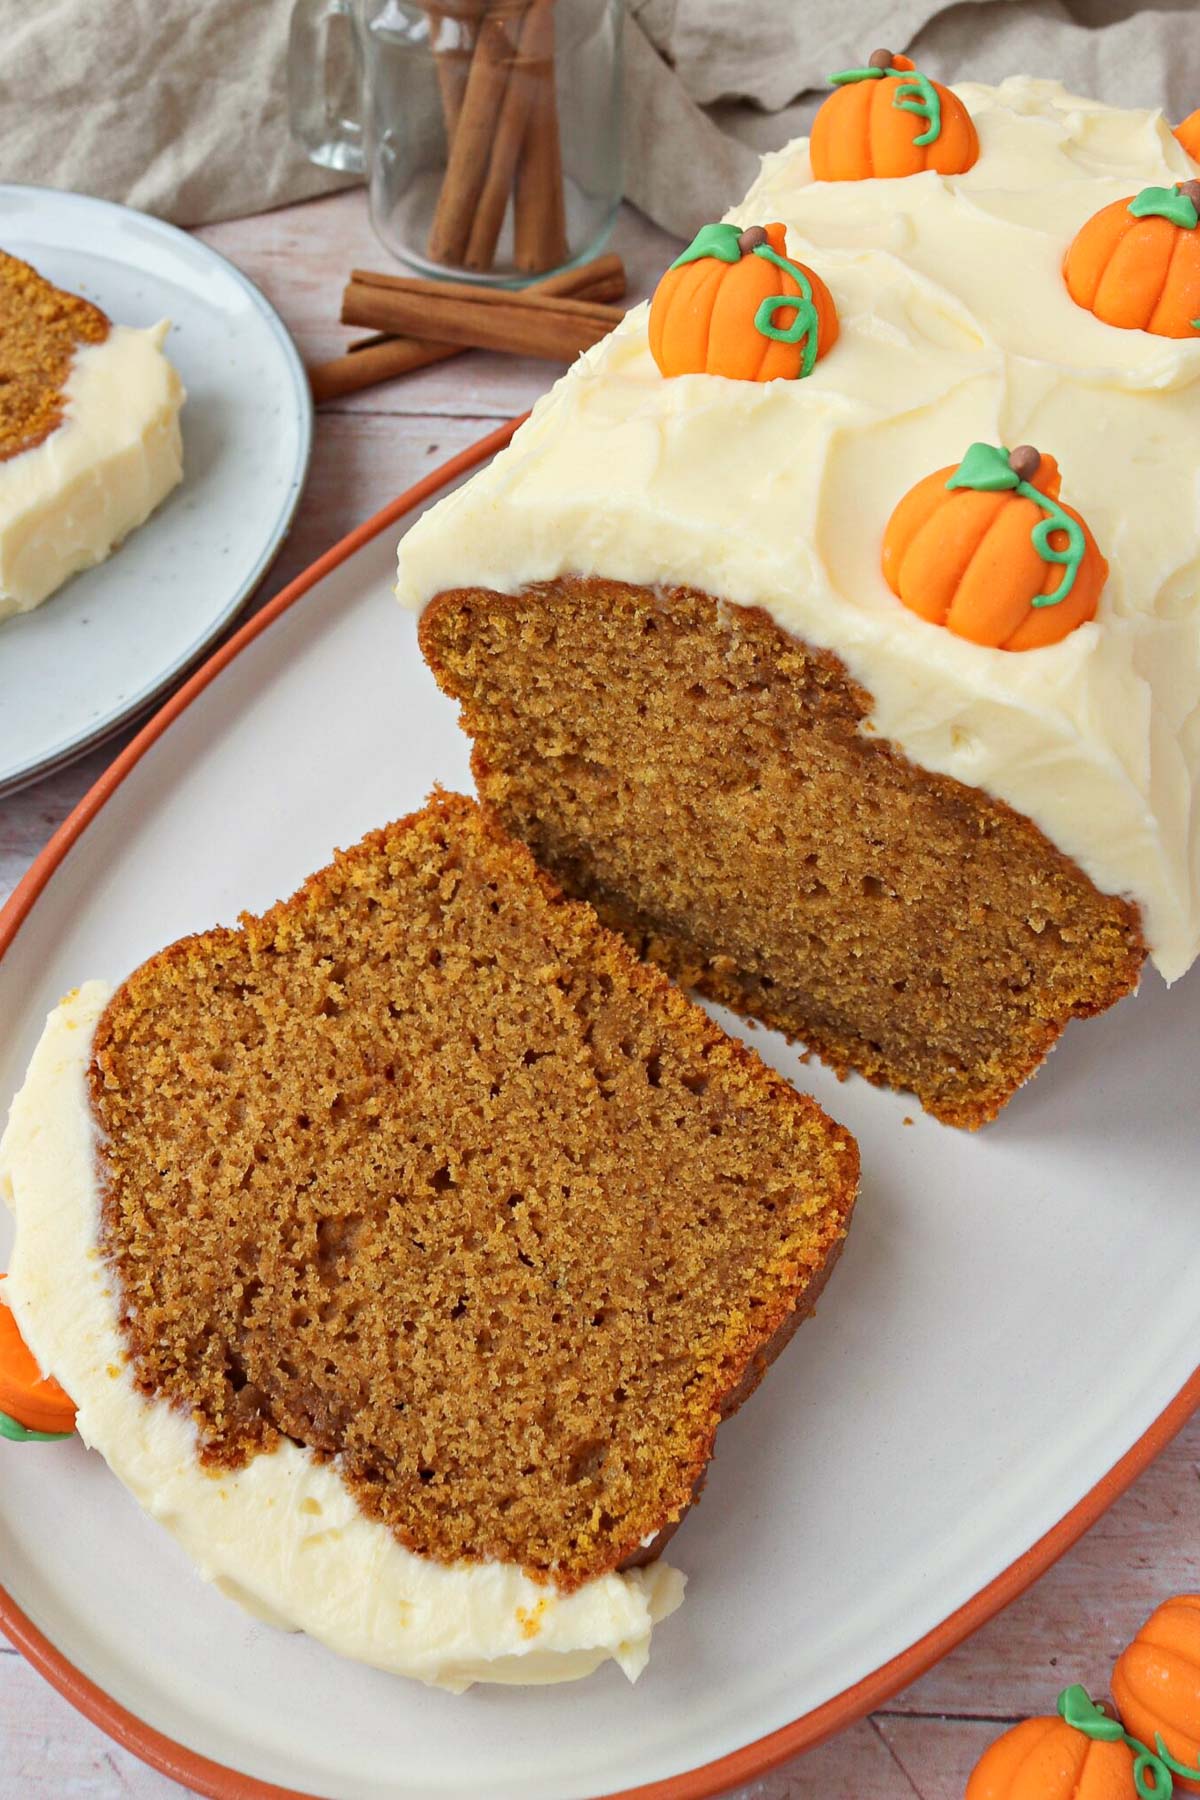 Pumpkin loaf with cream cheese frosting from The Baking Explorer decorated with candy pumpkins.